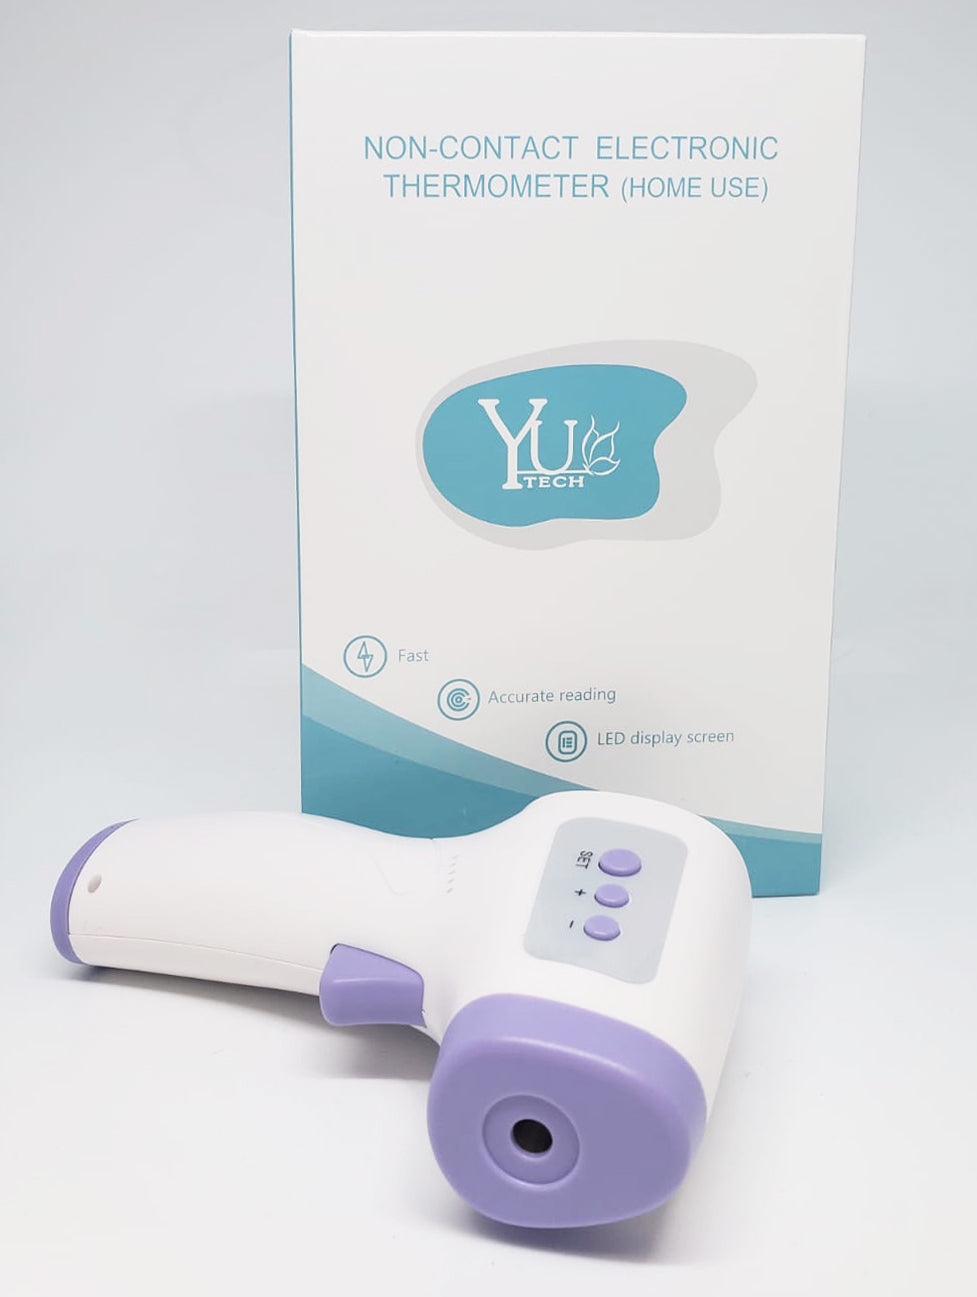 Thermometer Yu Tech Non-Contact Electronic (Home Use)